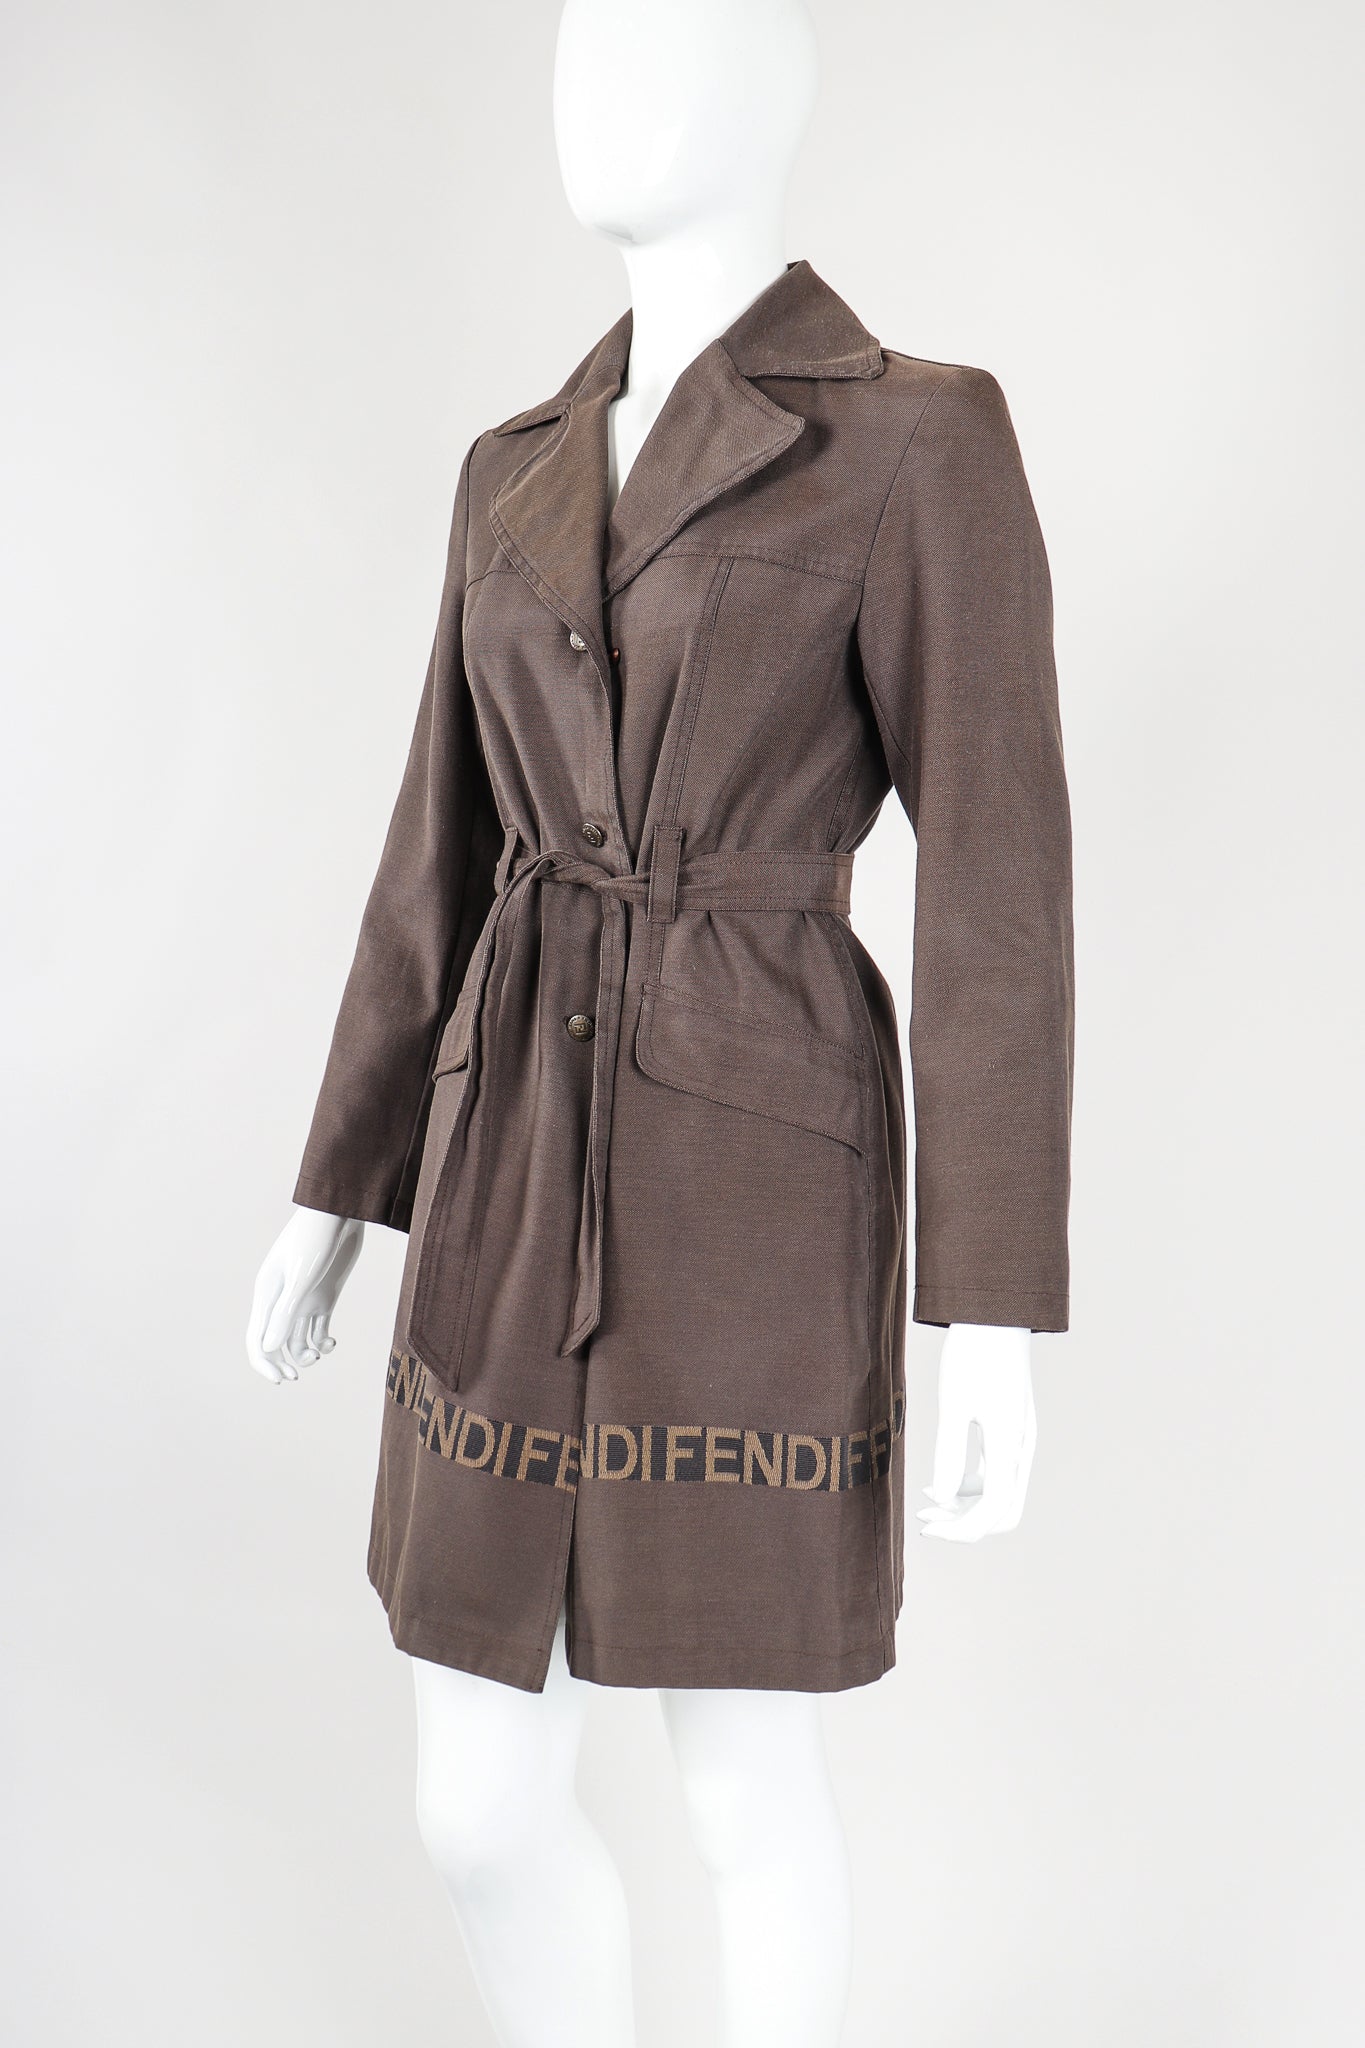 Recess Vintage Fendi Brown Canvas Trench Coat on Mannenquin